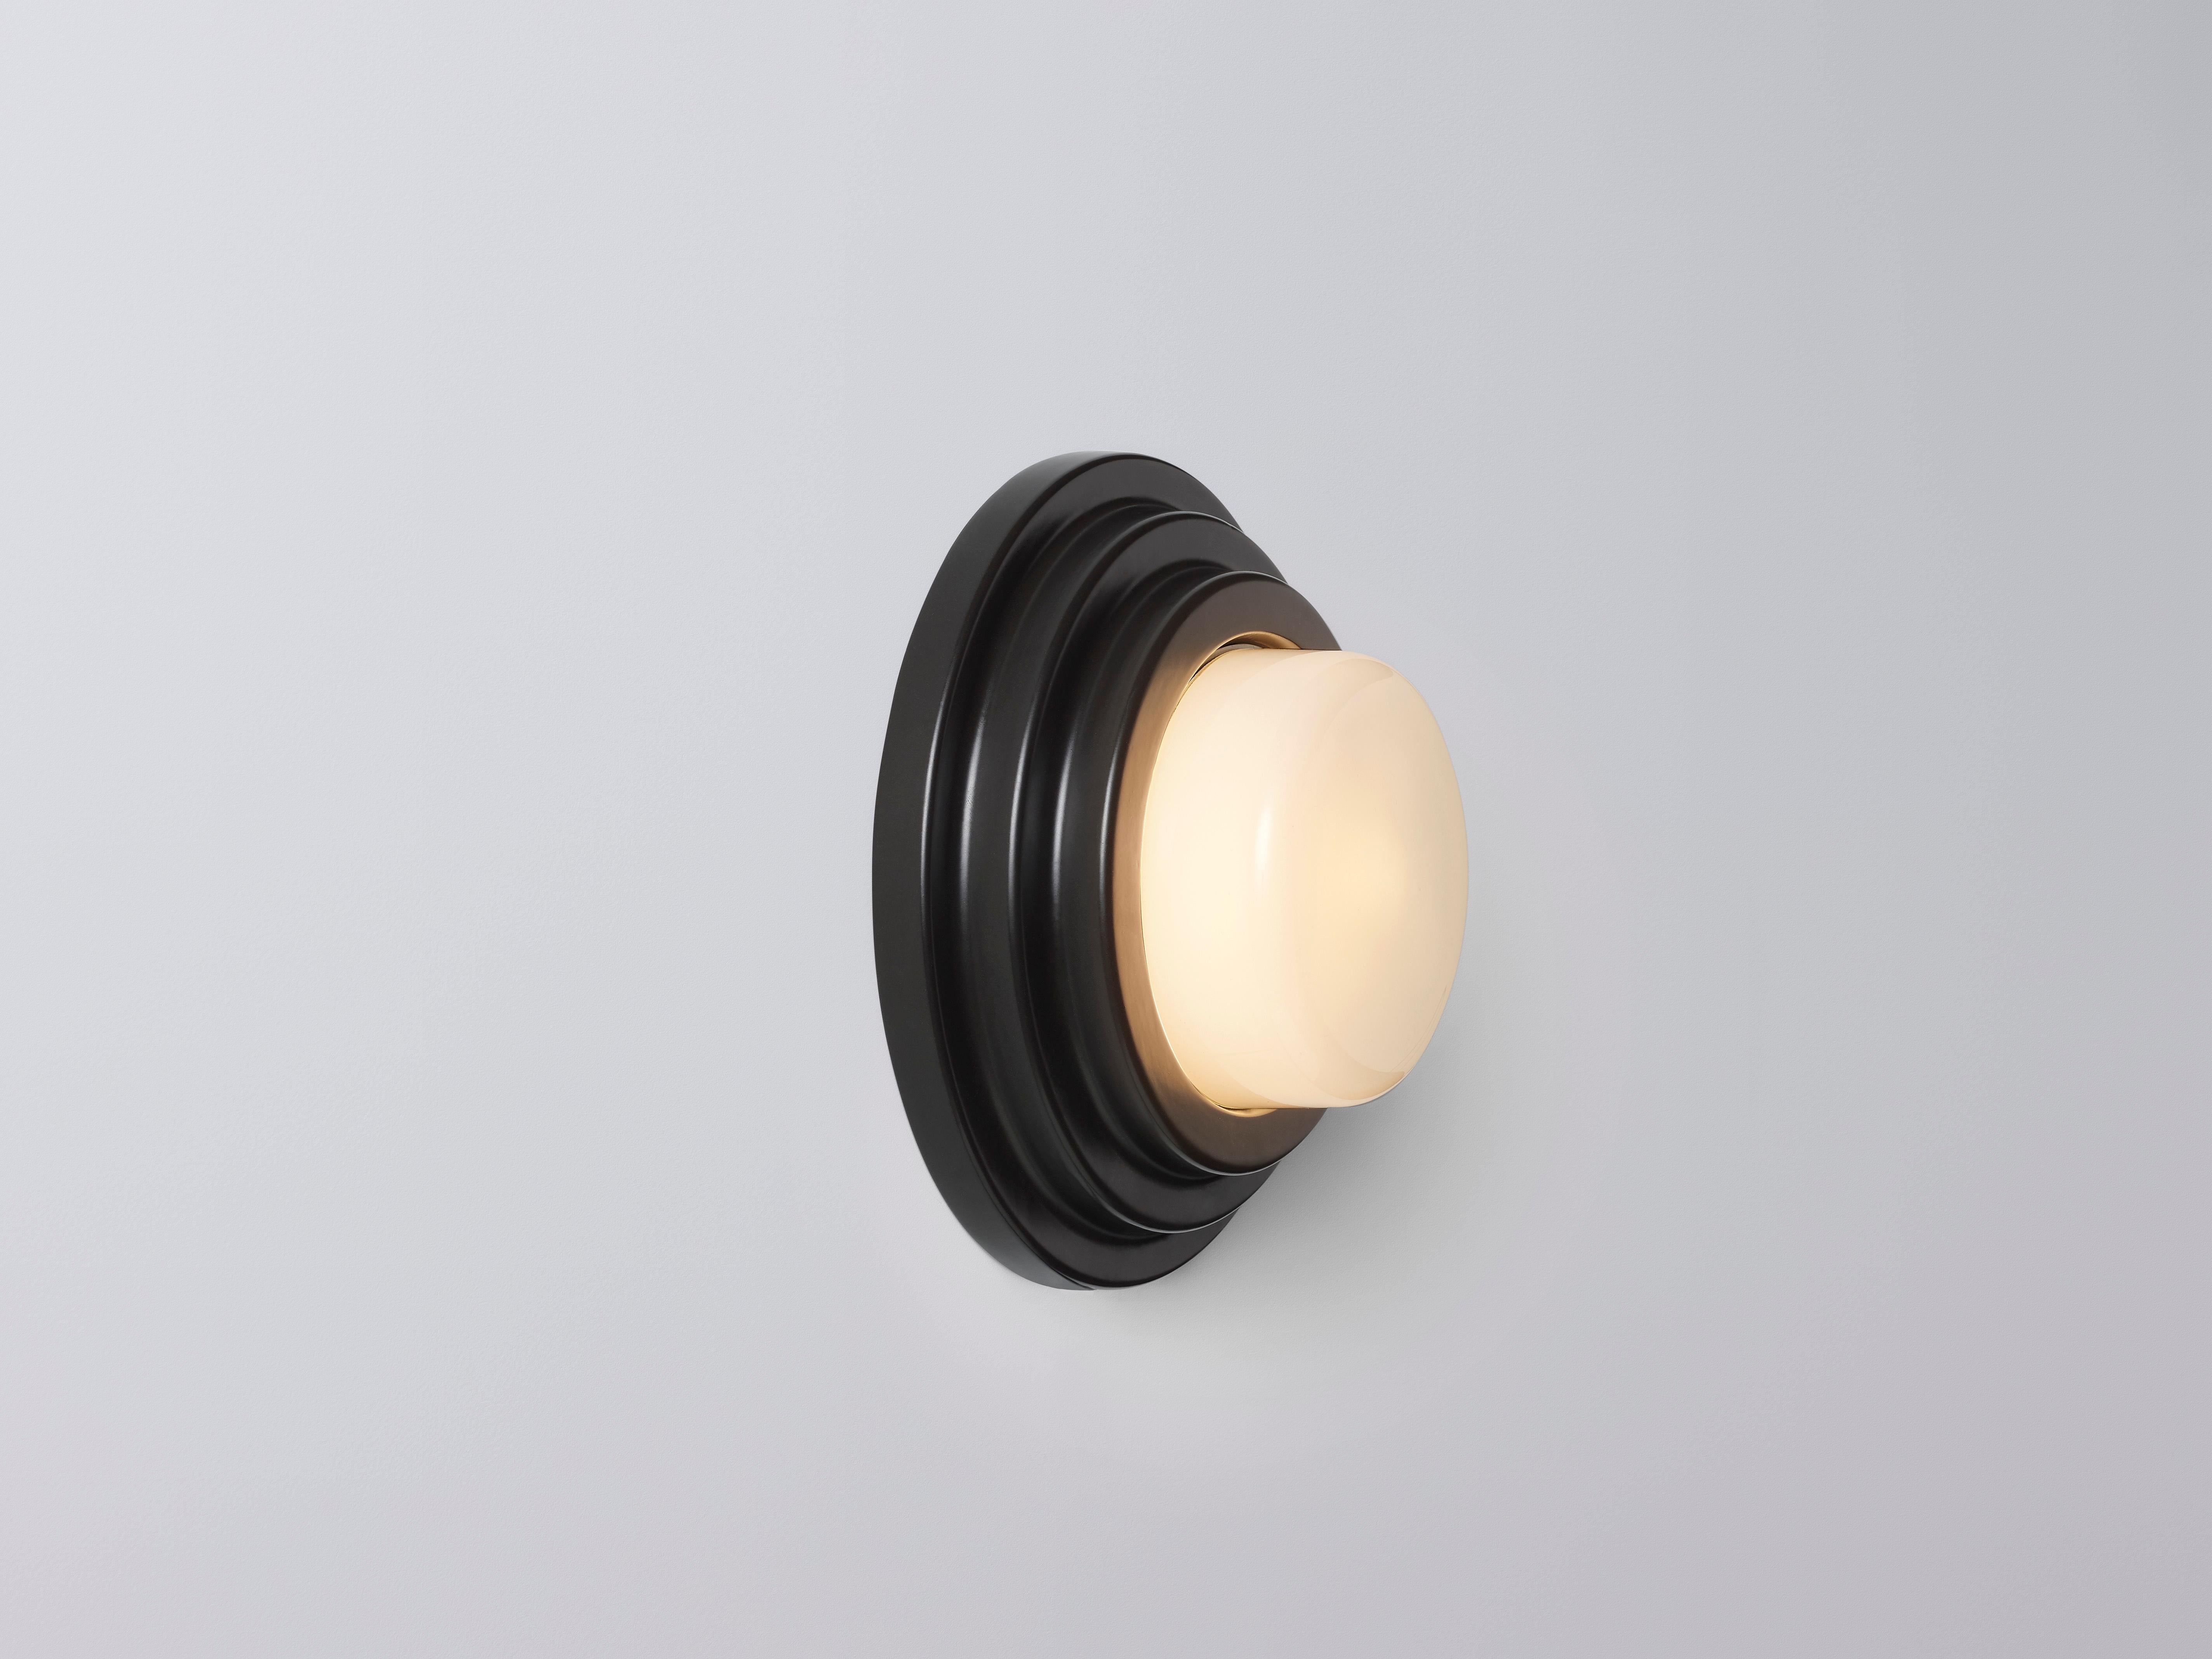 Australian Large Black Honey Wall Sconce by Coco Flip For Sale